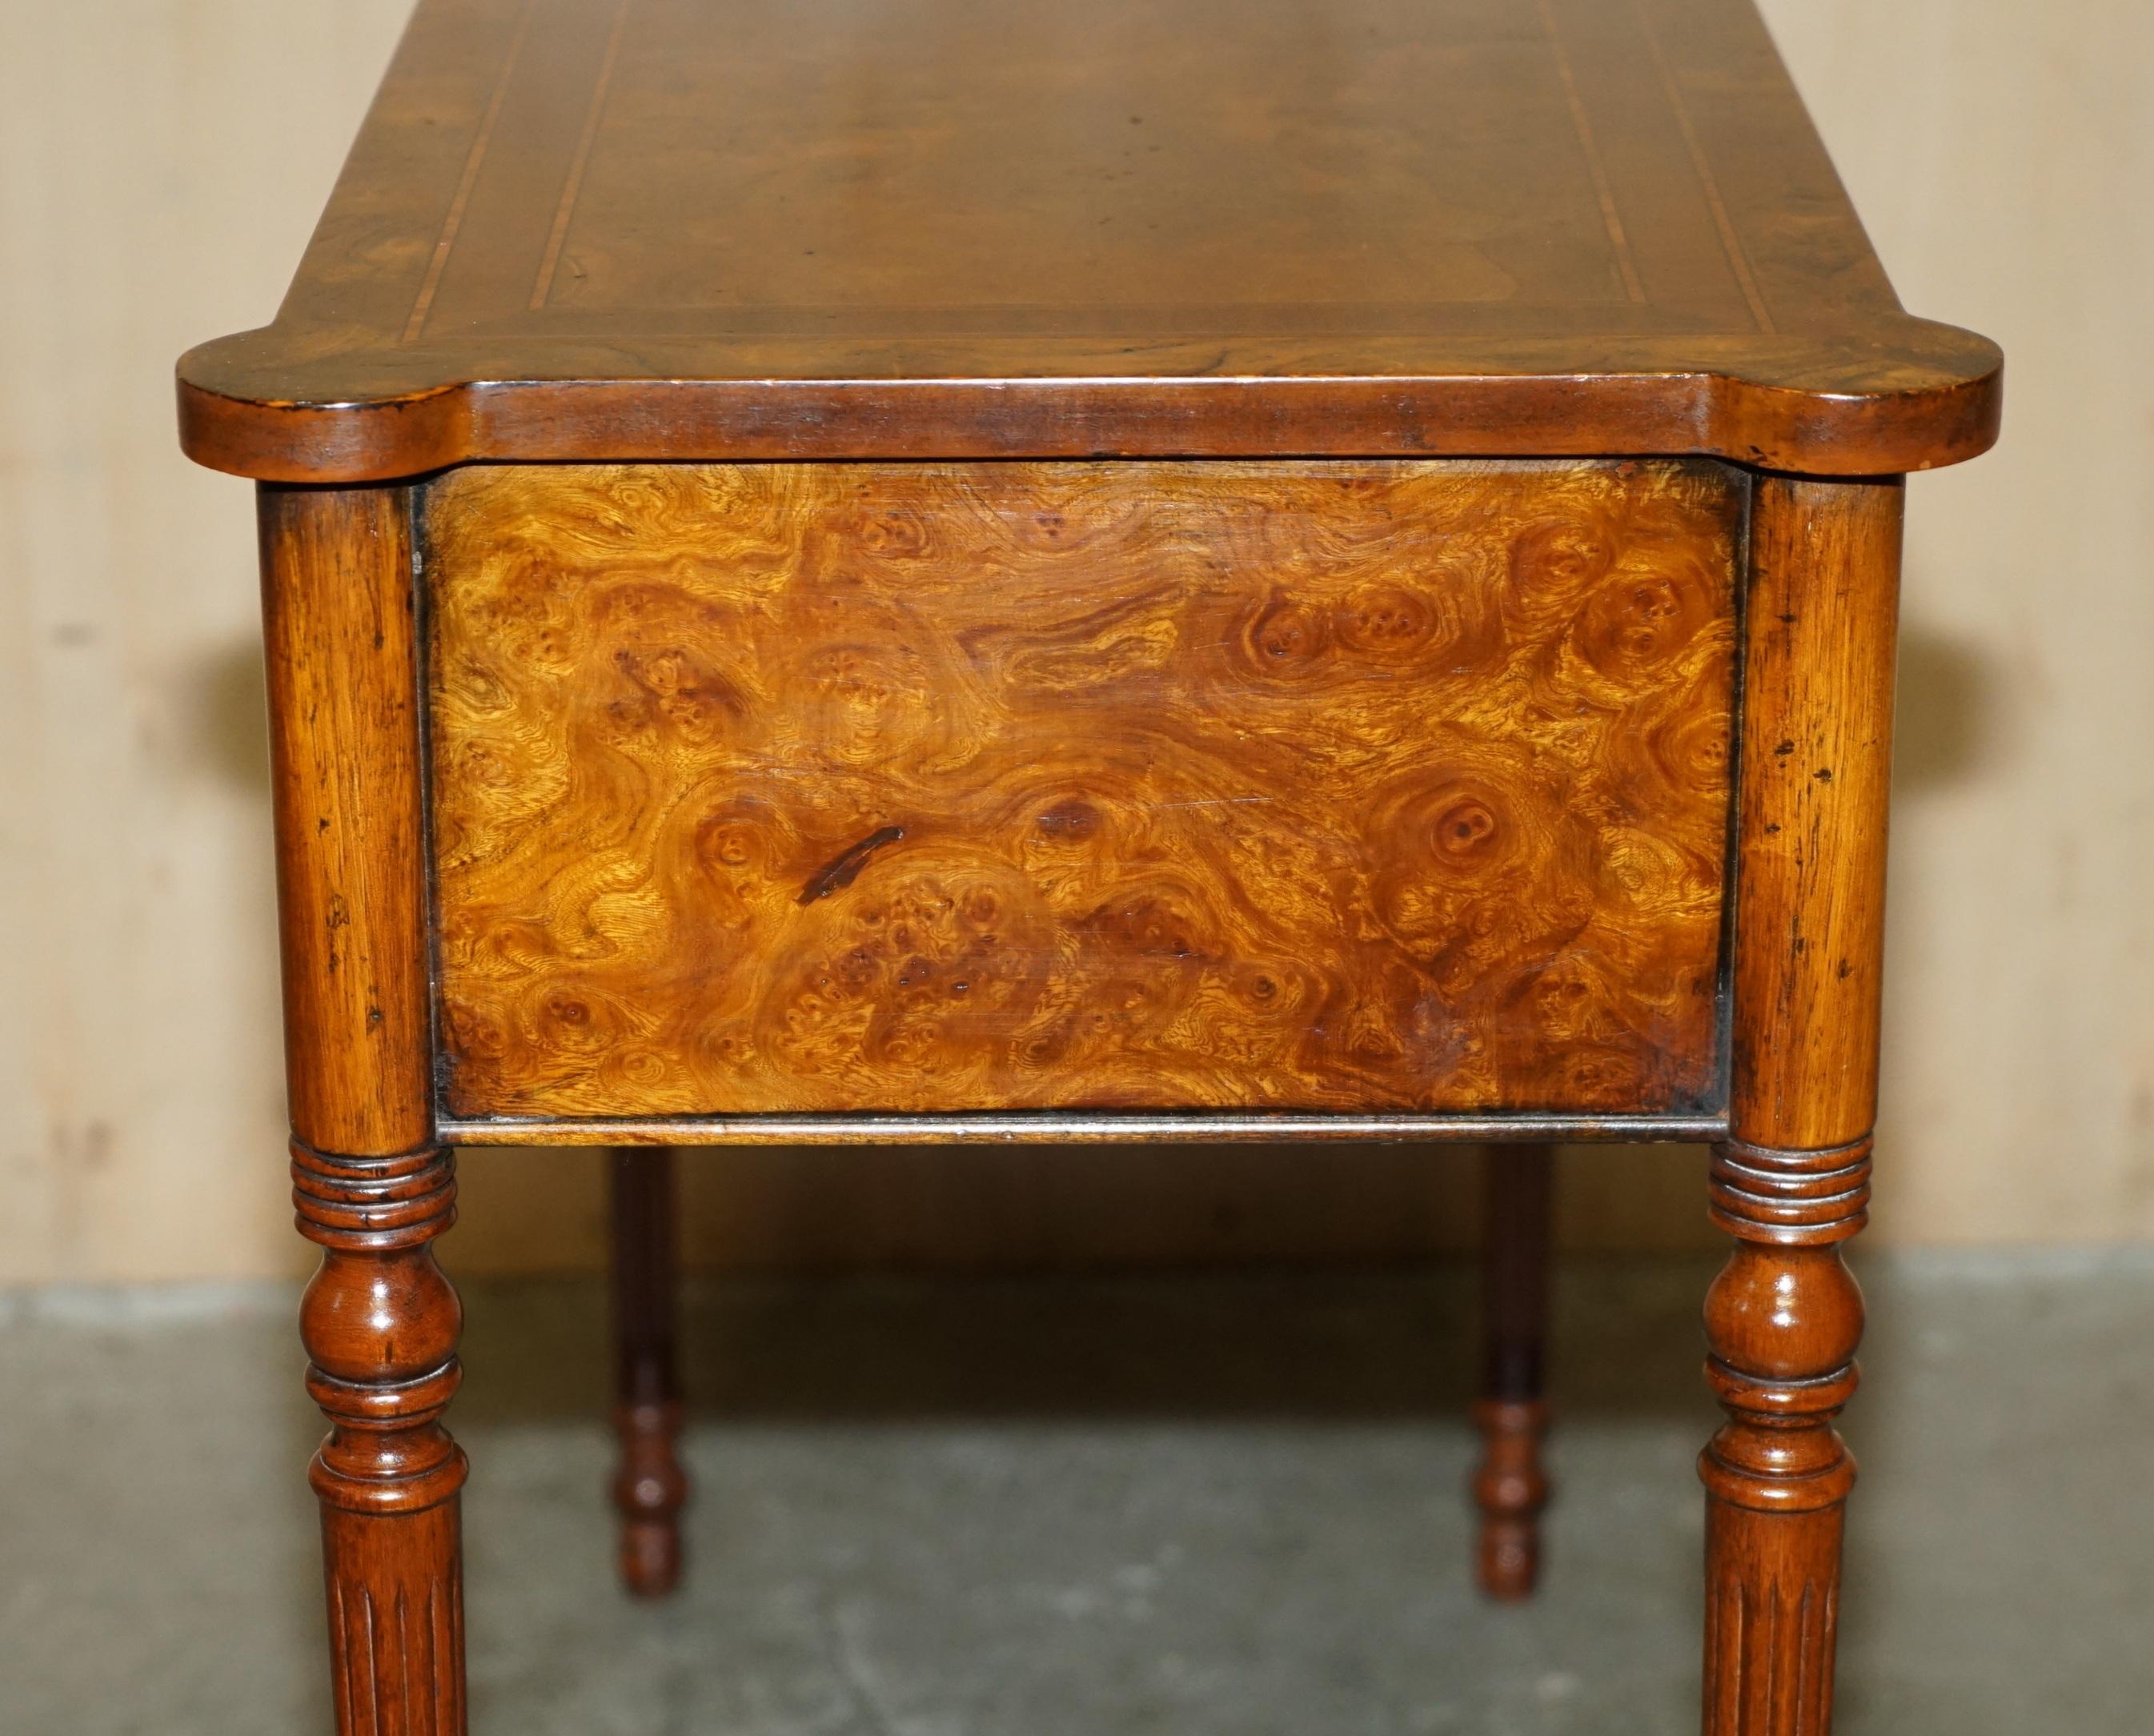 EXQUISITE CIRCA 1920 BURR ELM & SATiNWOOD FRENCH POLISHED RESTORED CONSOLE TABLE im Angebot 7